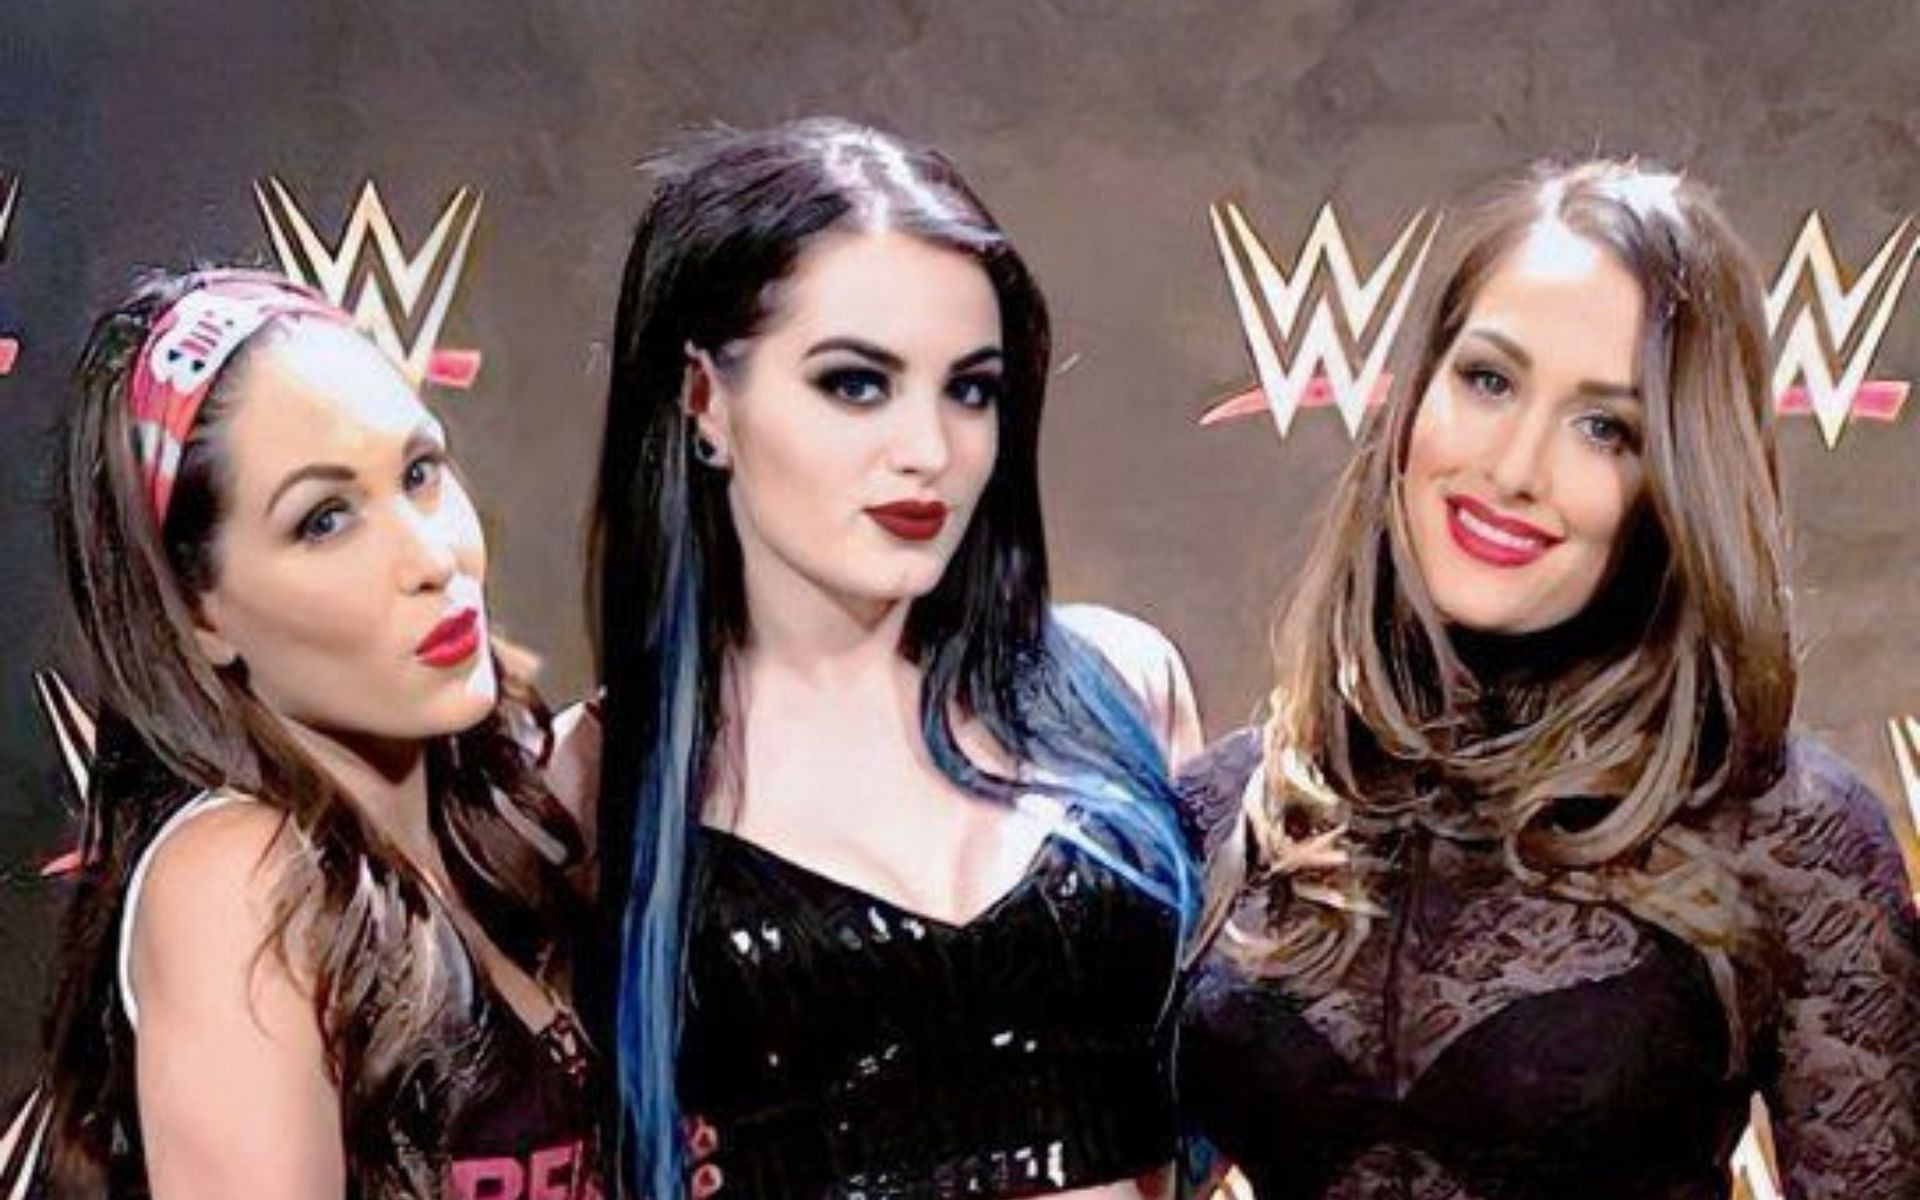 The Bella Twins and Saraya (fka Paige) in a backstage photo together.